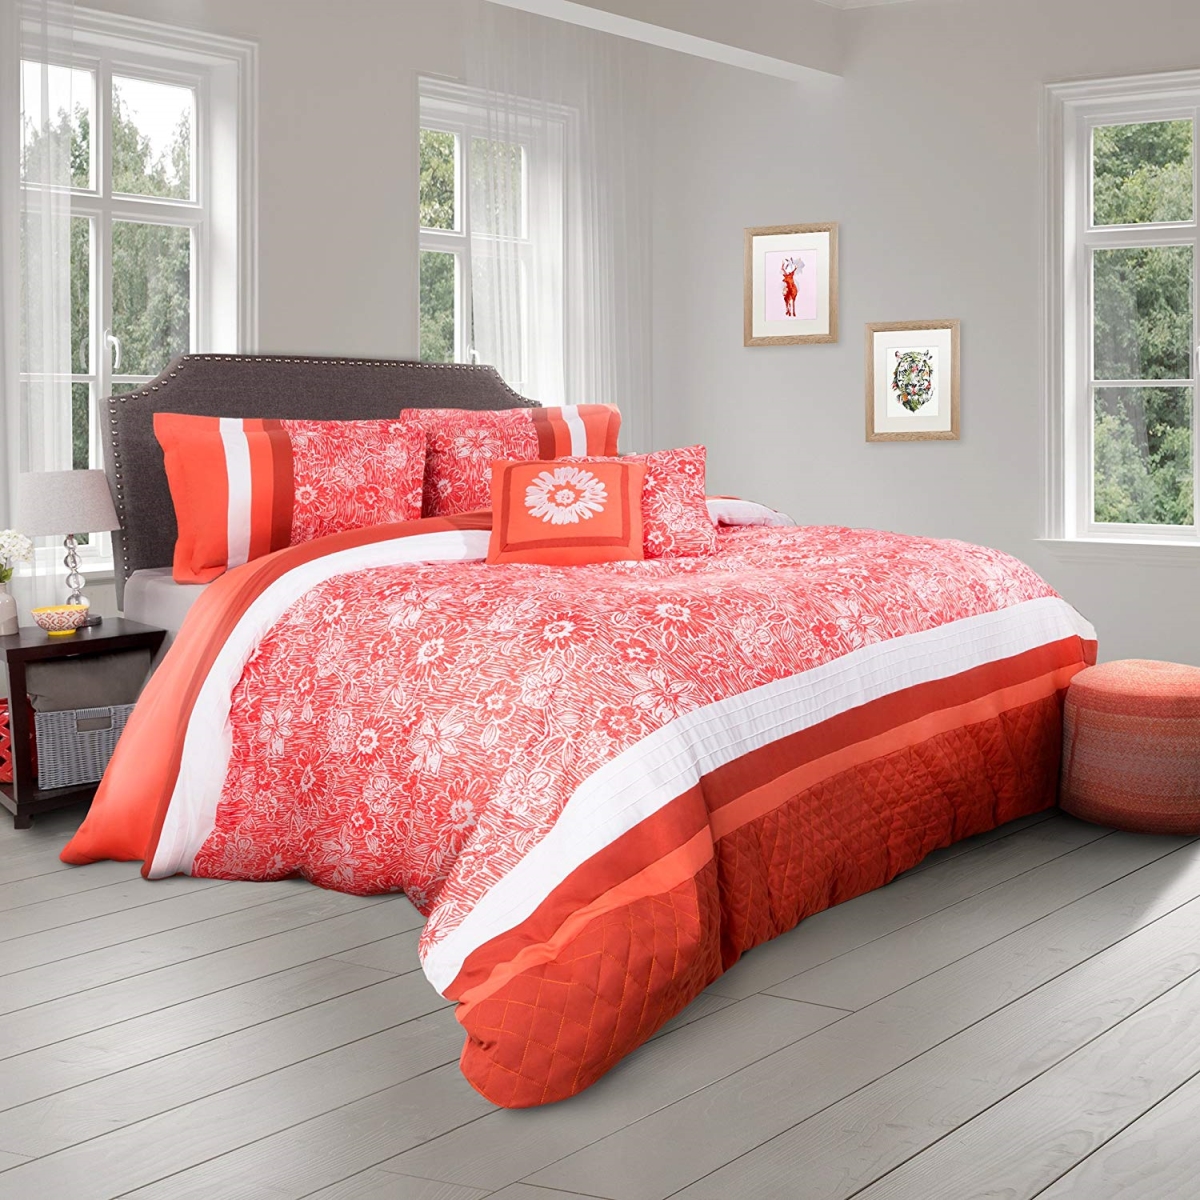 66A-92634 5 Piece Bedding with 2 Decorative Pillows Comforter Set, King Size - Red